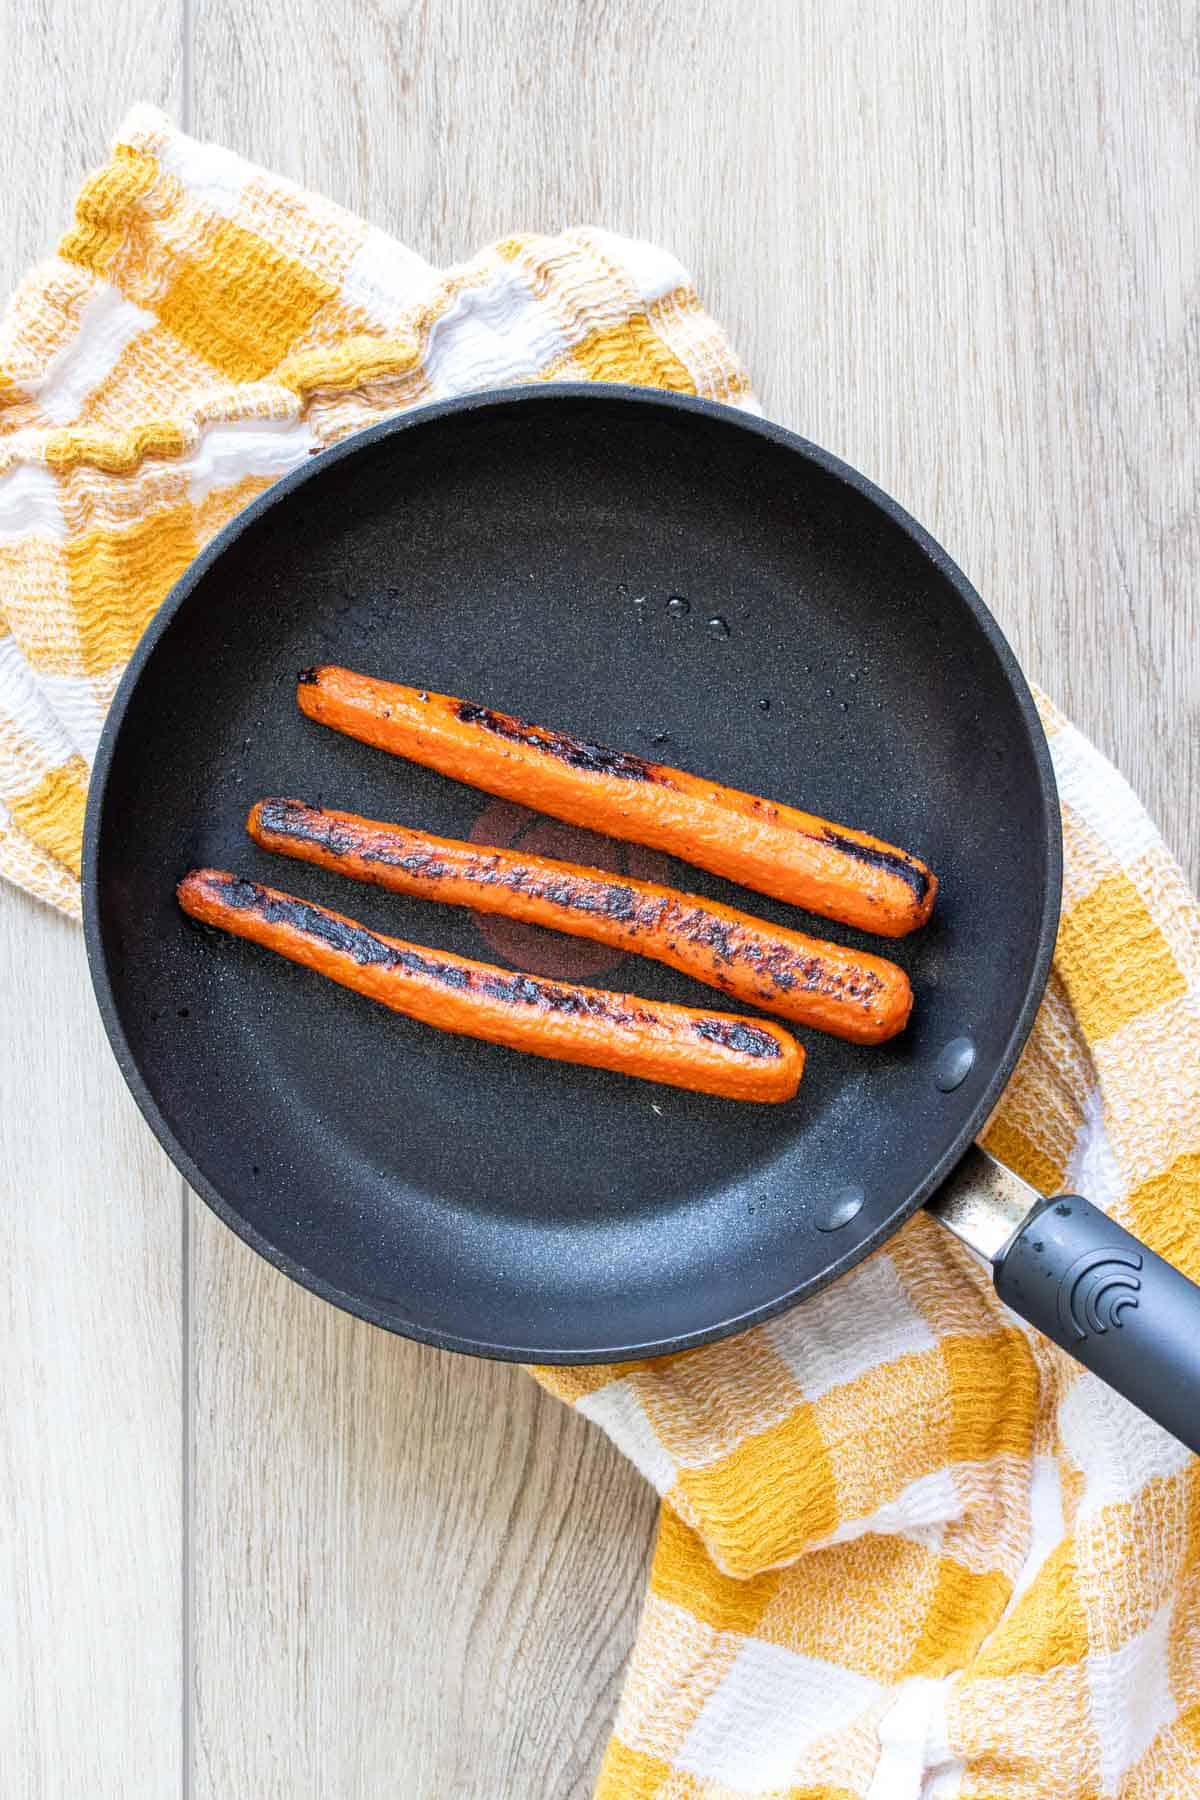 Three carrots being cooked and charred in a pan